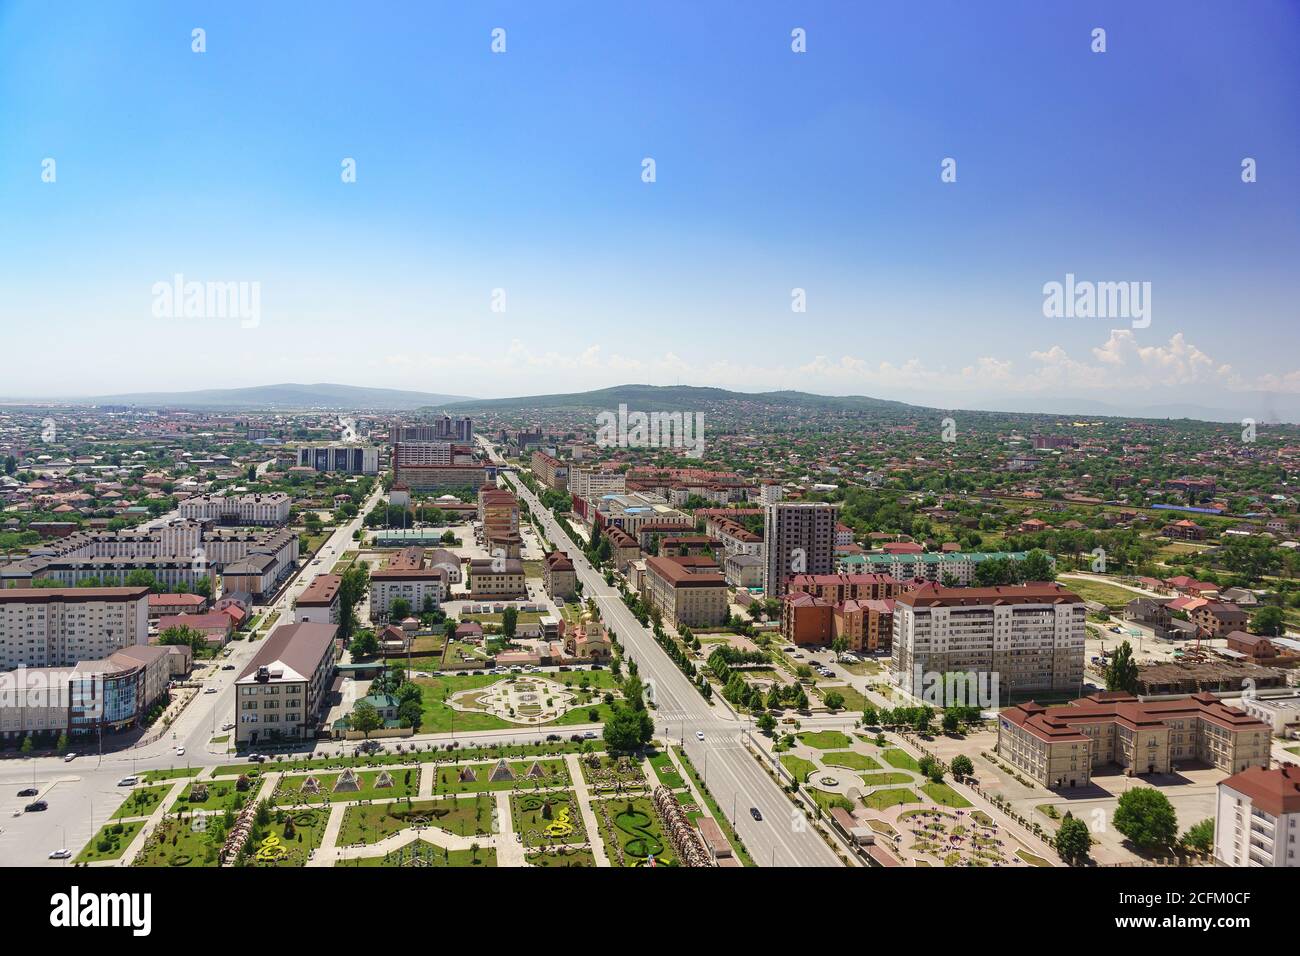 Grozny, Chechen Republic, Russia - June 02, 2019: View from the observation deck of the Grozny city high-rise complex towards the Flower Park and Akhm Stock Photo